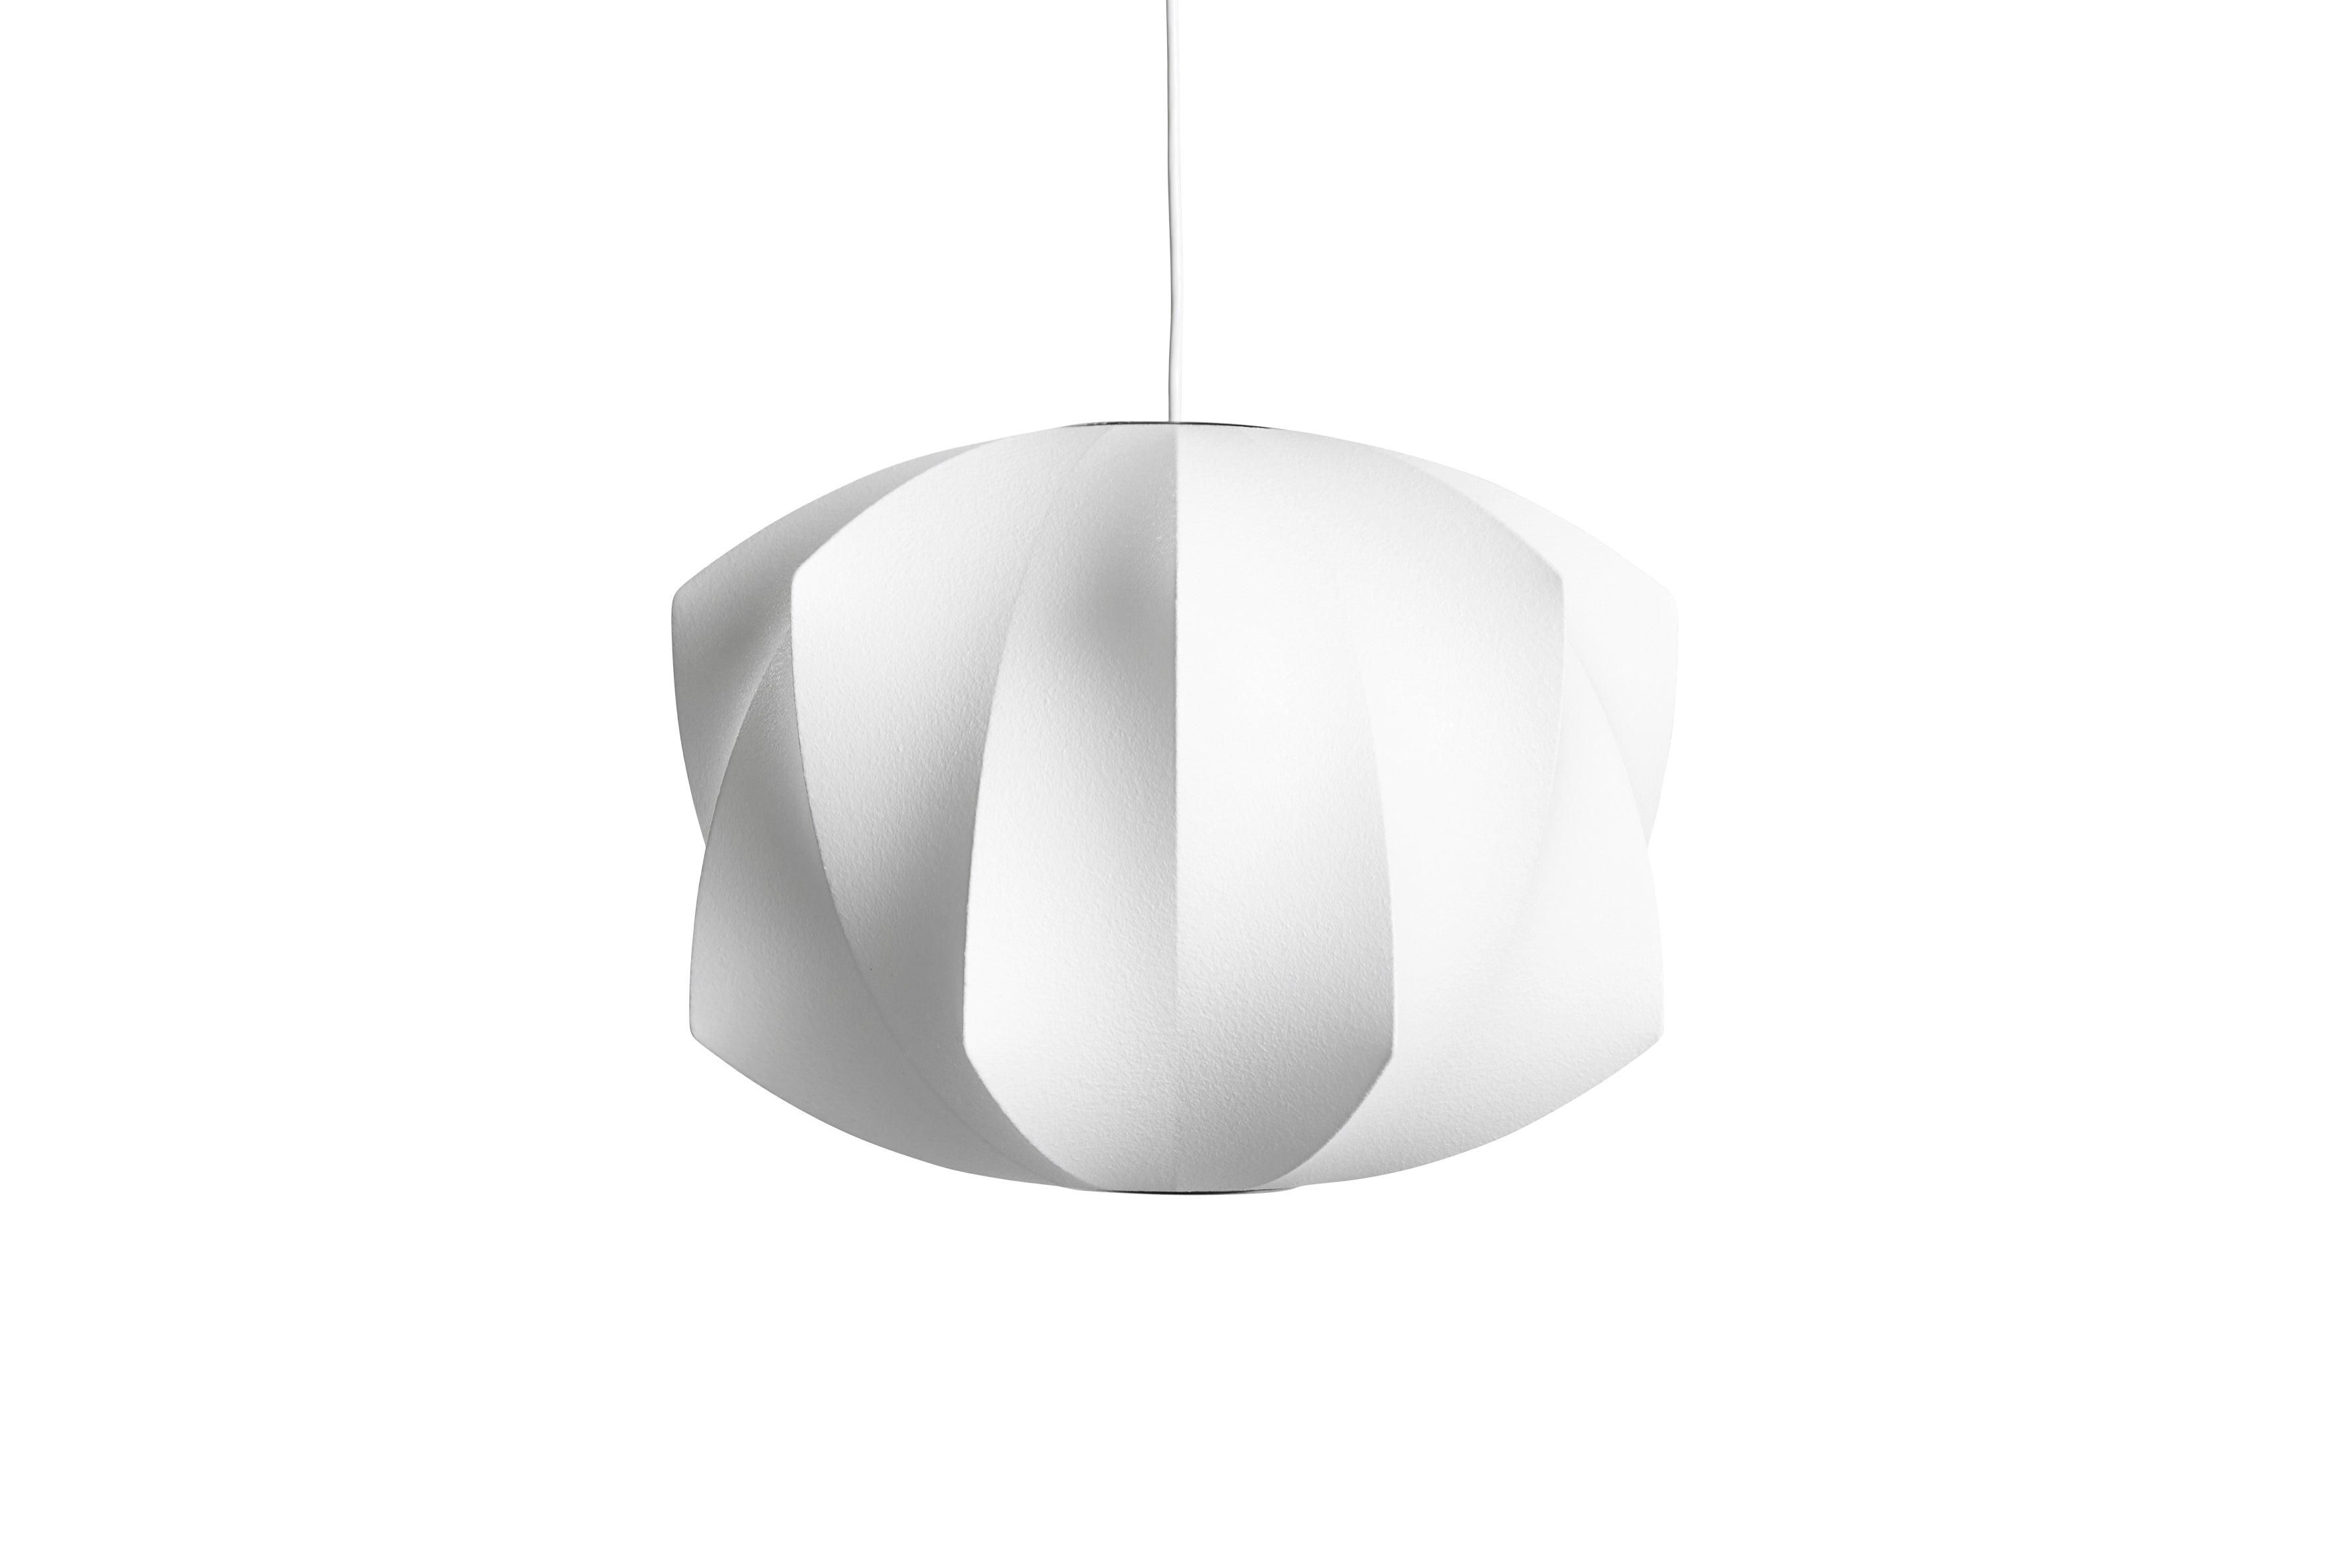 HAY Nelson Propeller Bubble Pendant Lamp by George Nelson